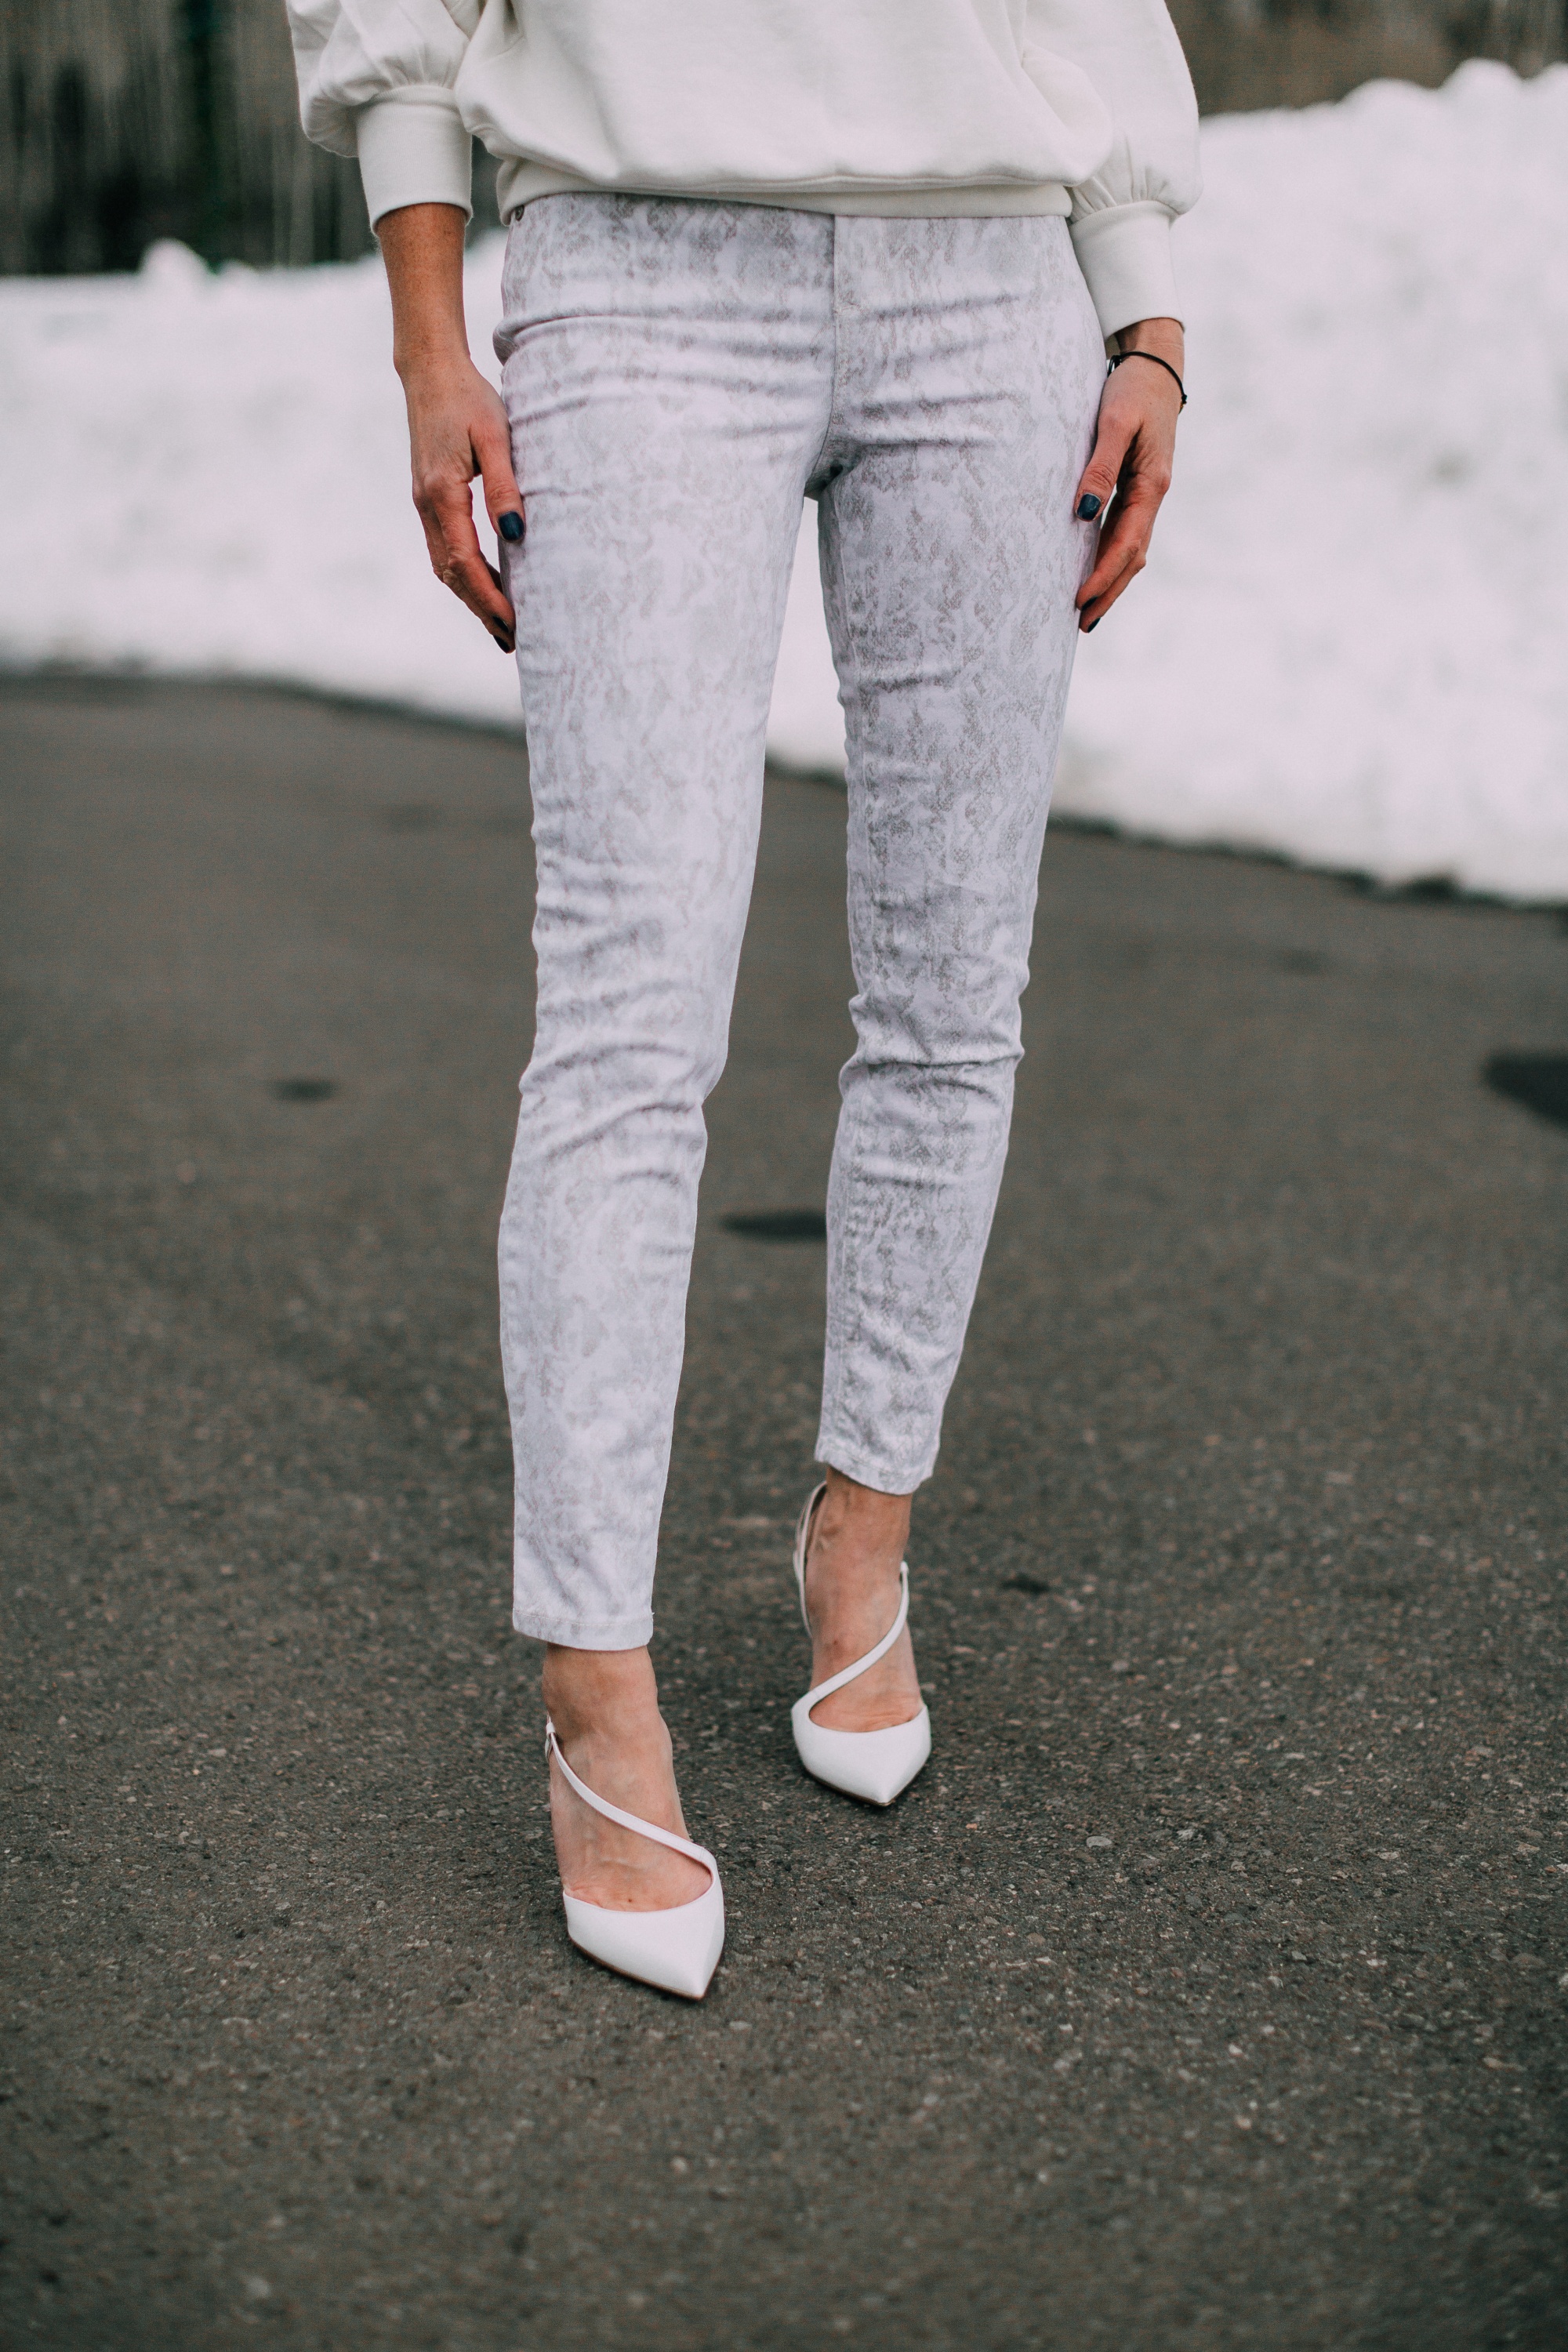 fashion blogger showing outfit with white snakeskin walmart sofia vergara jeans outfit with white pumps and sweatshirt